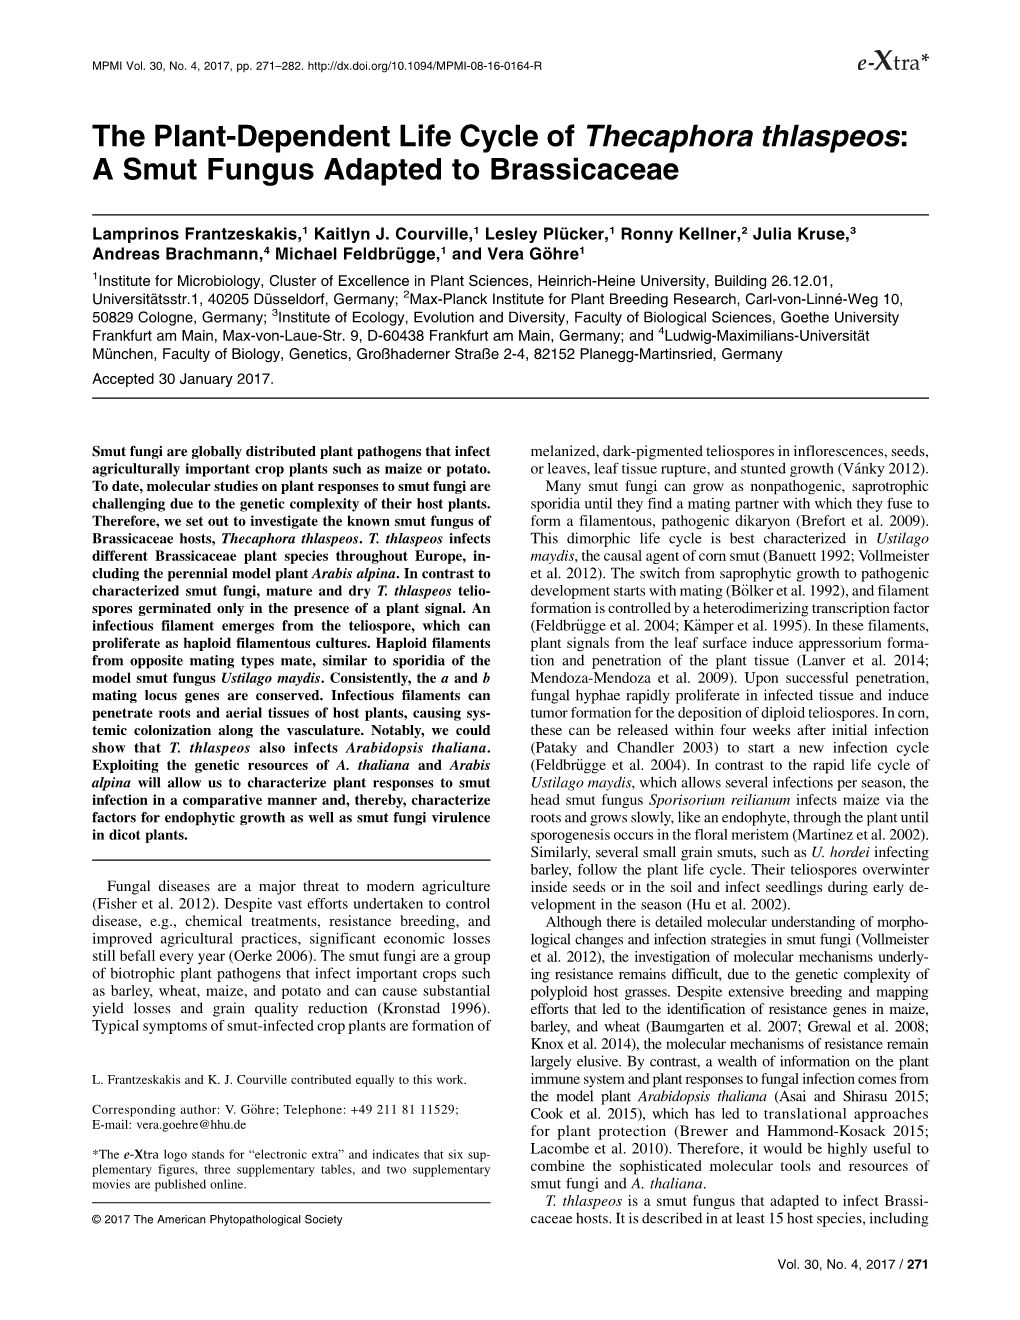 The Plant-Dependent Life Cycle of Thecaphora Thlaspeos: a Smut Fungus Adapted to Brassicaceae